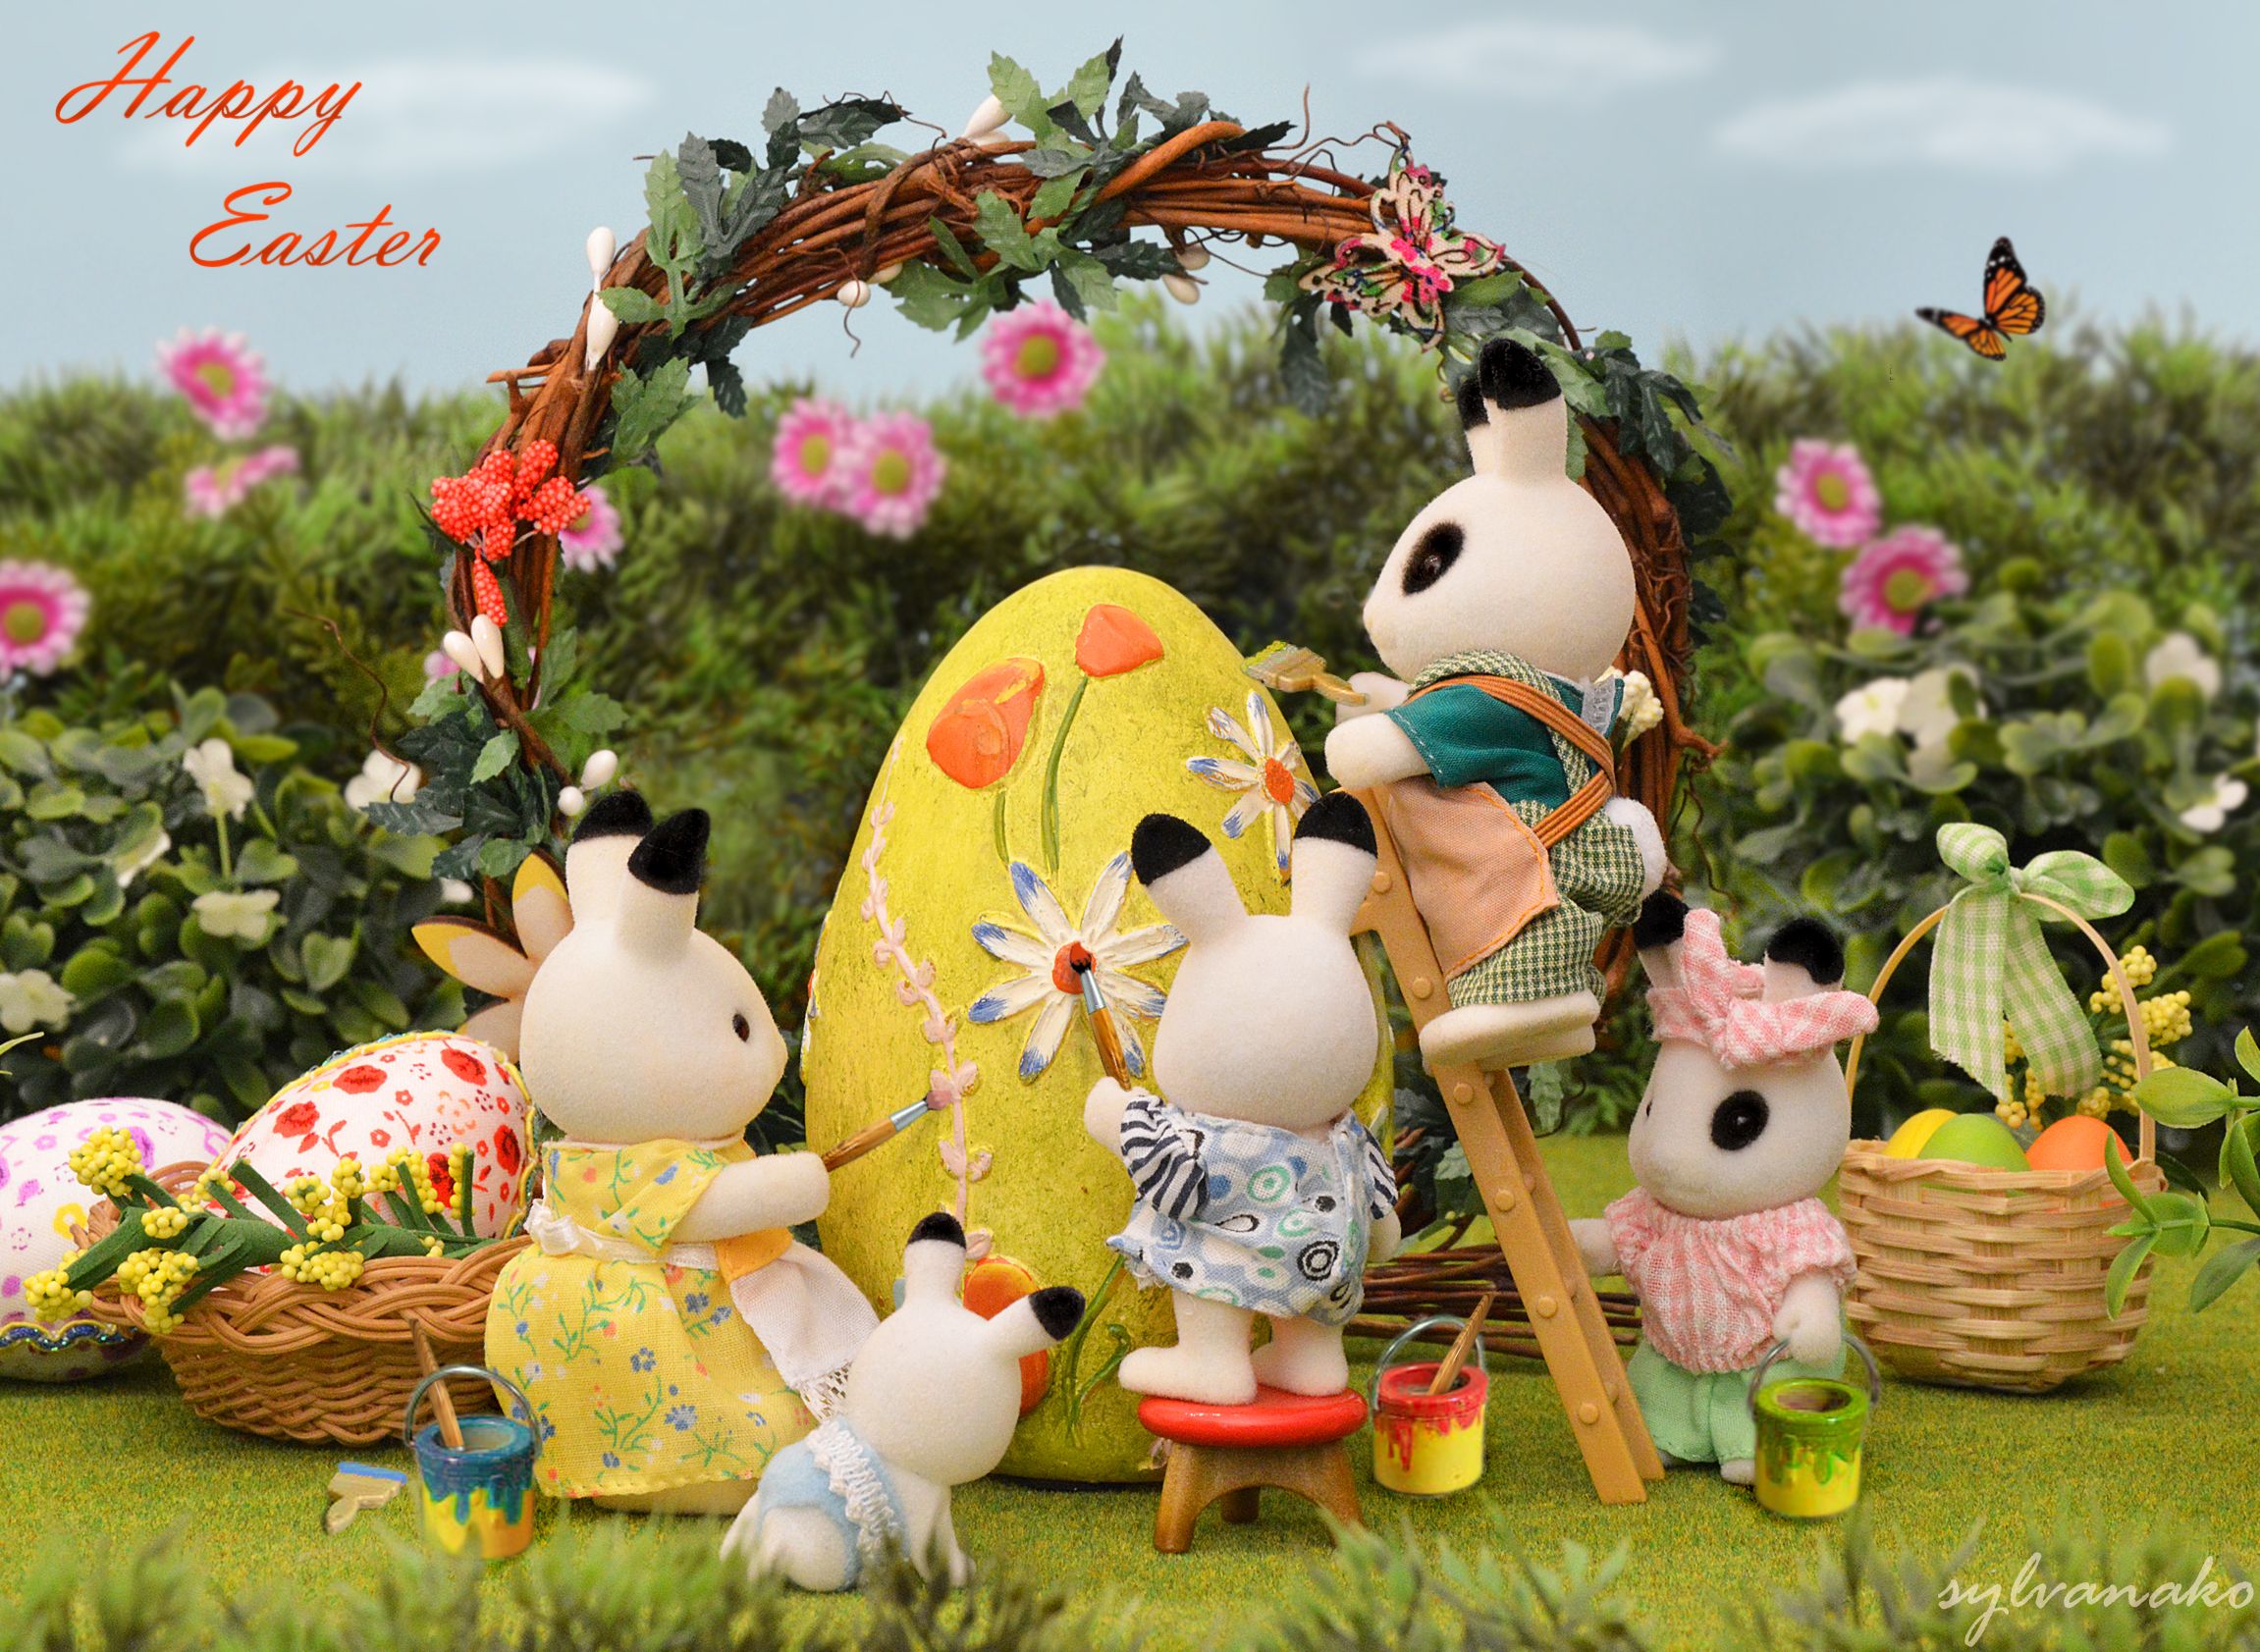 Wallpaper, flowers, cute, rabbit, playground, yard, garden, Toy, toys, spring, father, porch, calico, critters, ladder, rabbits, sylvanianfamilies, sylvanian, calicocritters 2302x1683